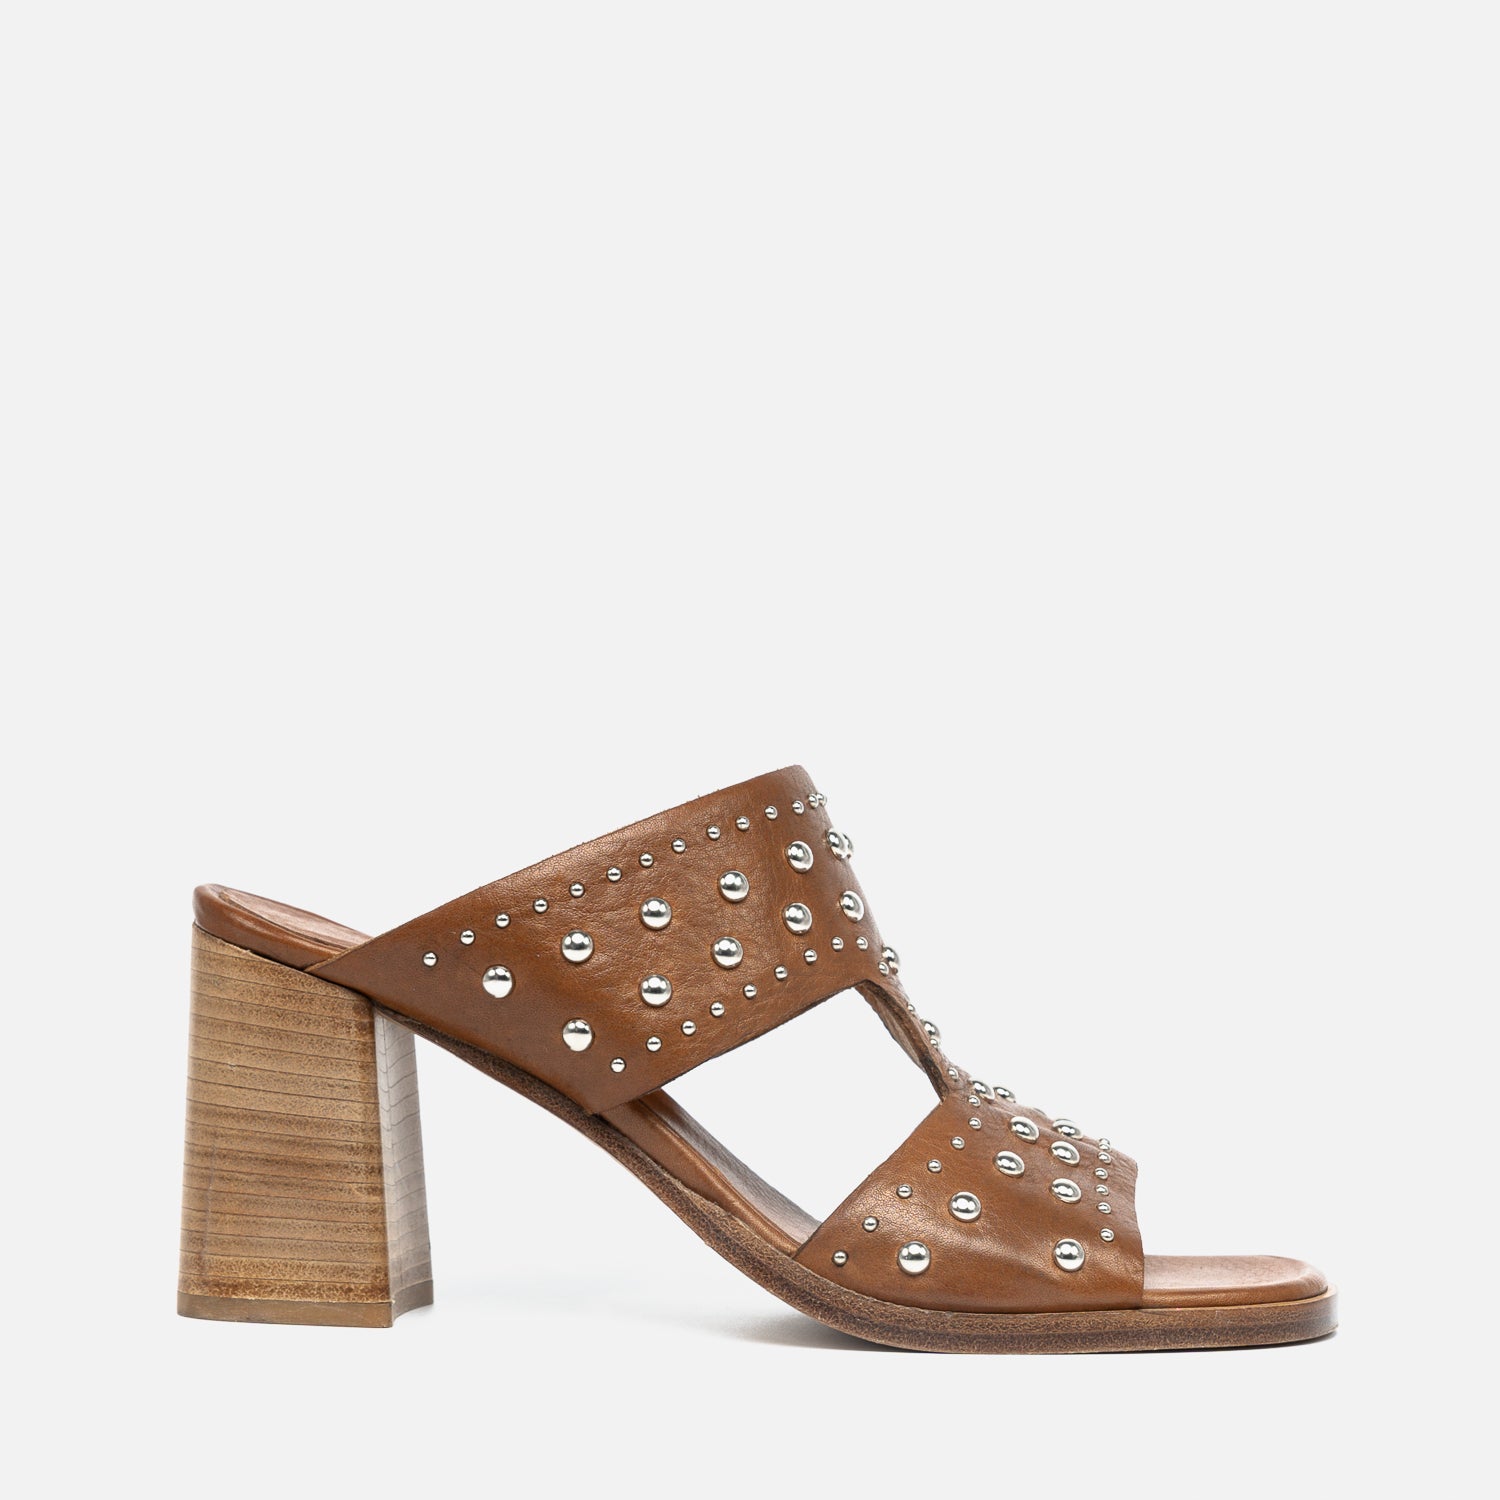 Angelica | Model 3787 sabot-style sandals tan